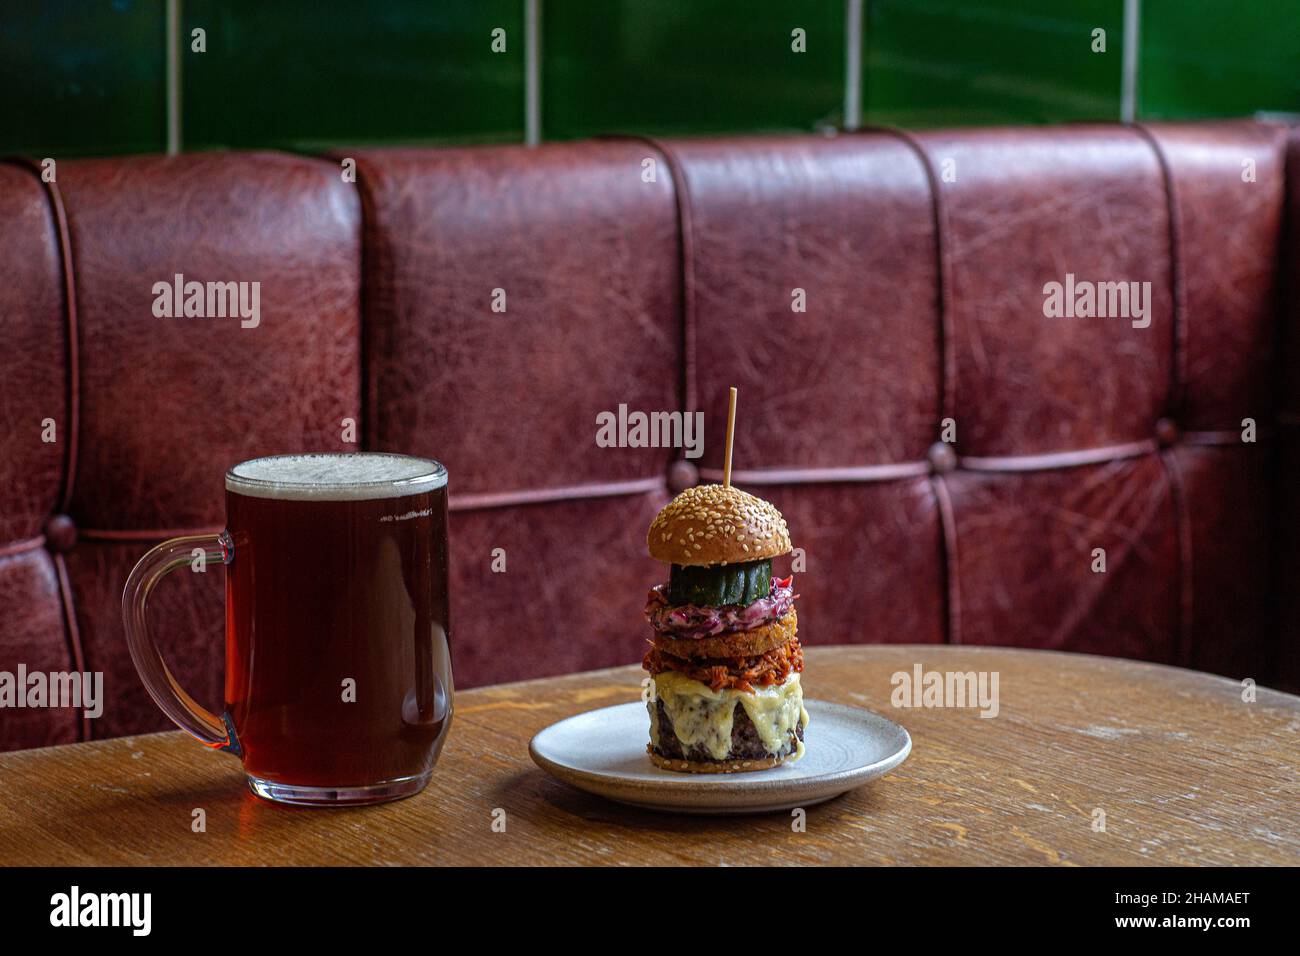 The Coach Burger with Cheddar, Pulled Pork and Dill Pickle at The Coach in Marlow, Buckinghamshire, UK indoor Stock Photo